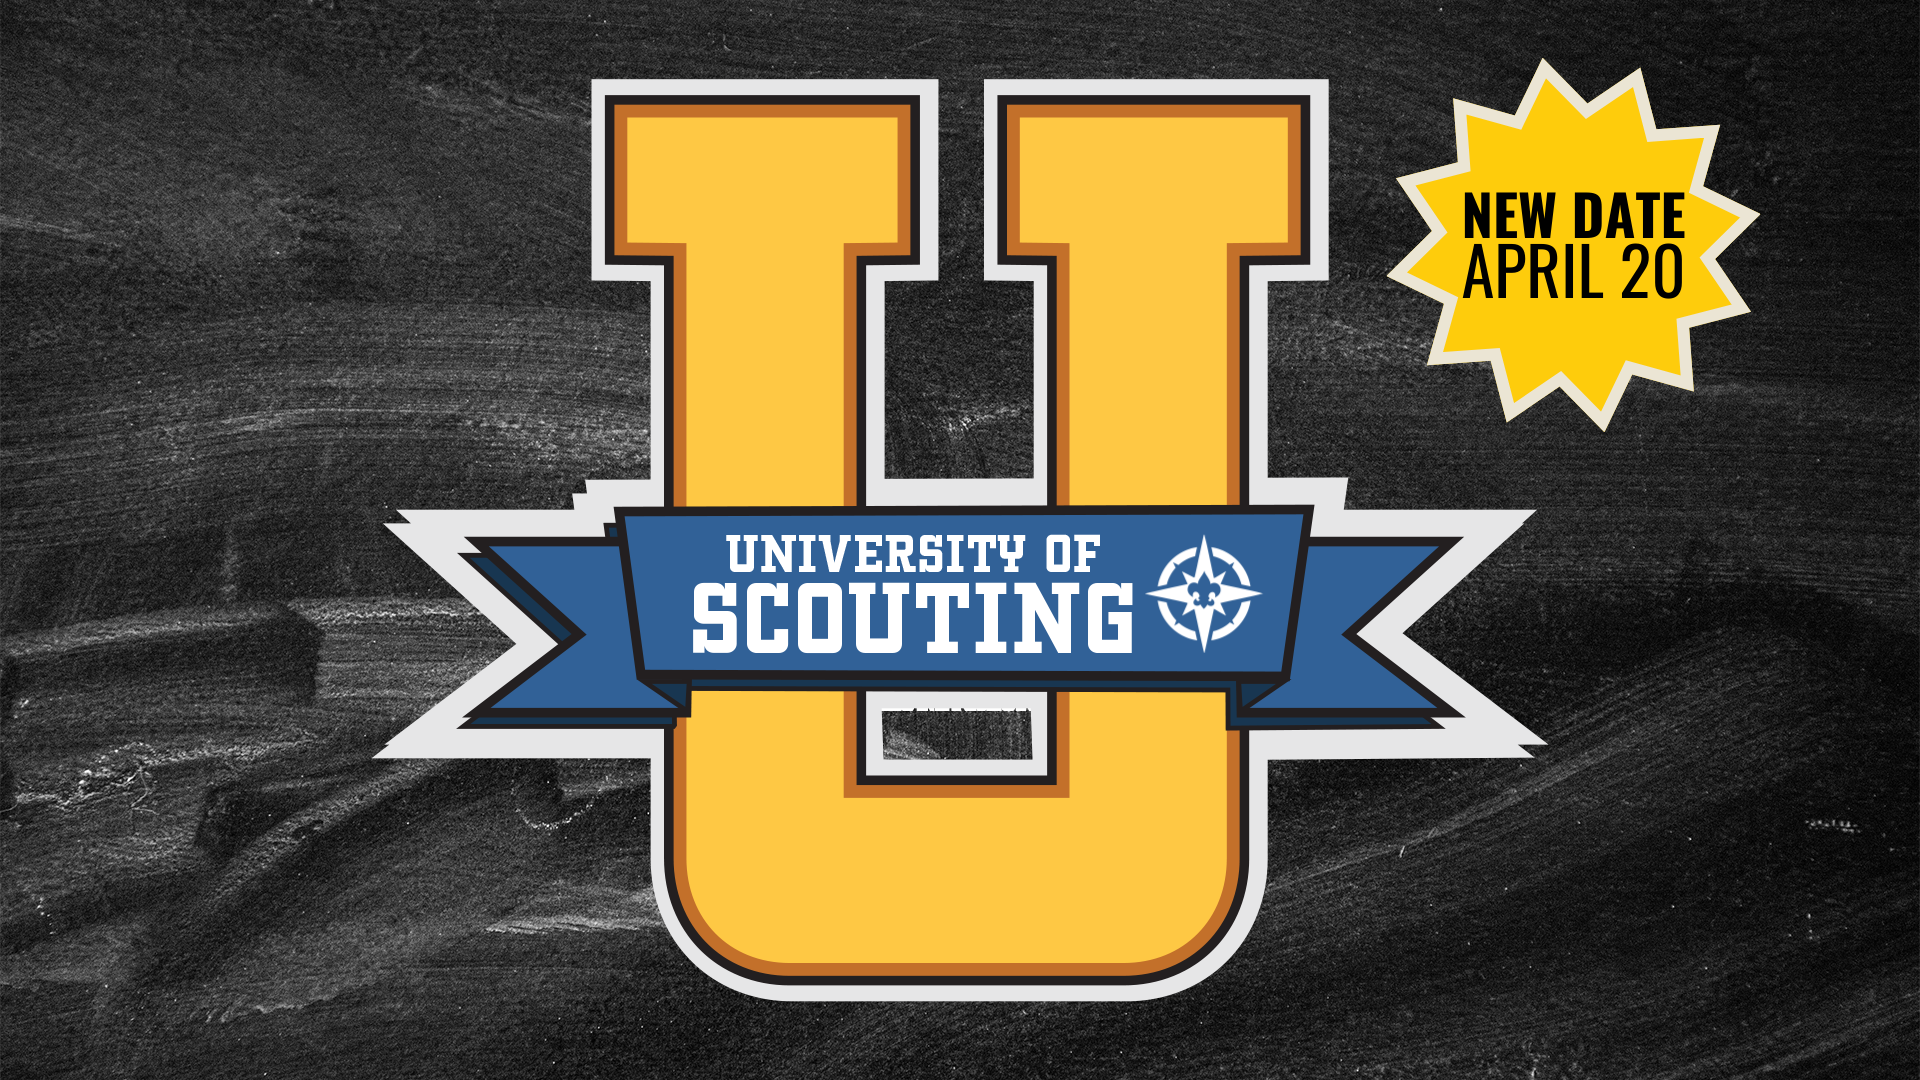 The University of Scouting Logo, a big letter "U" with a ribbon across it